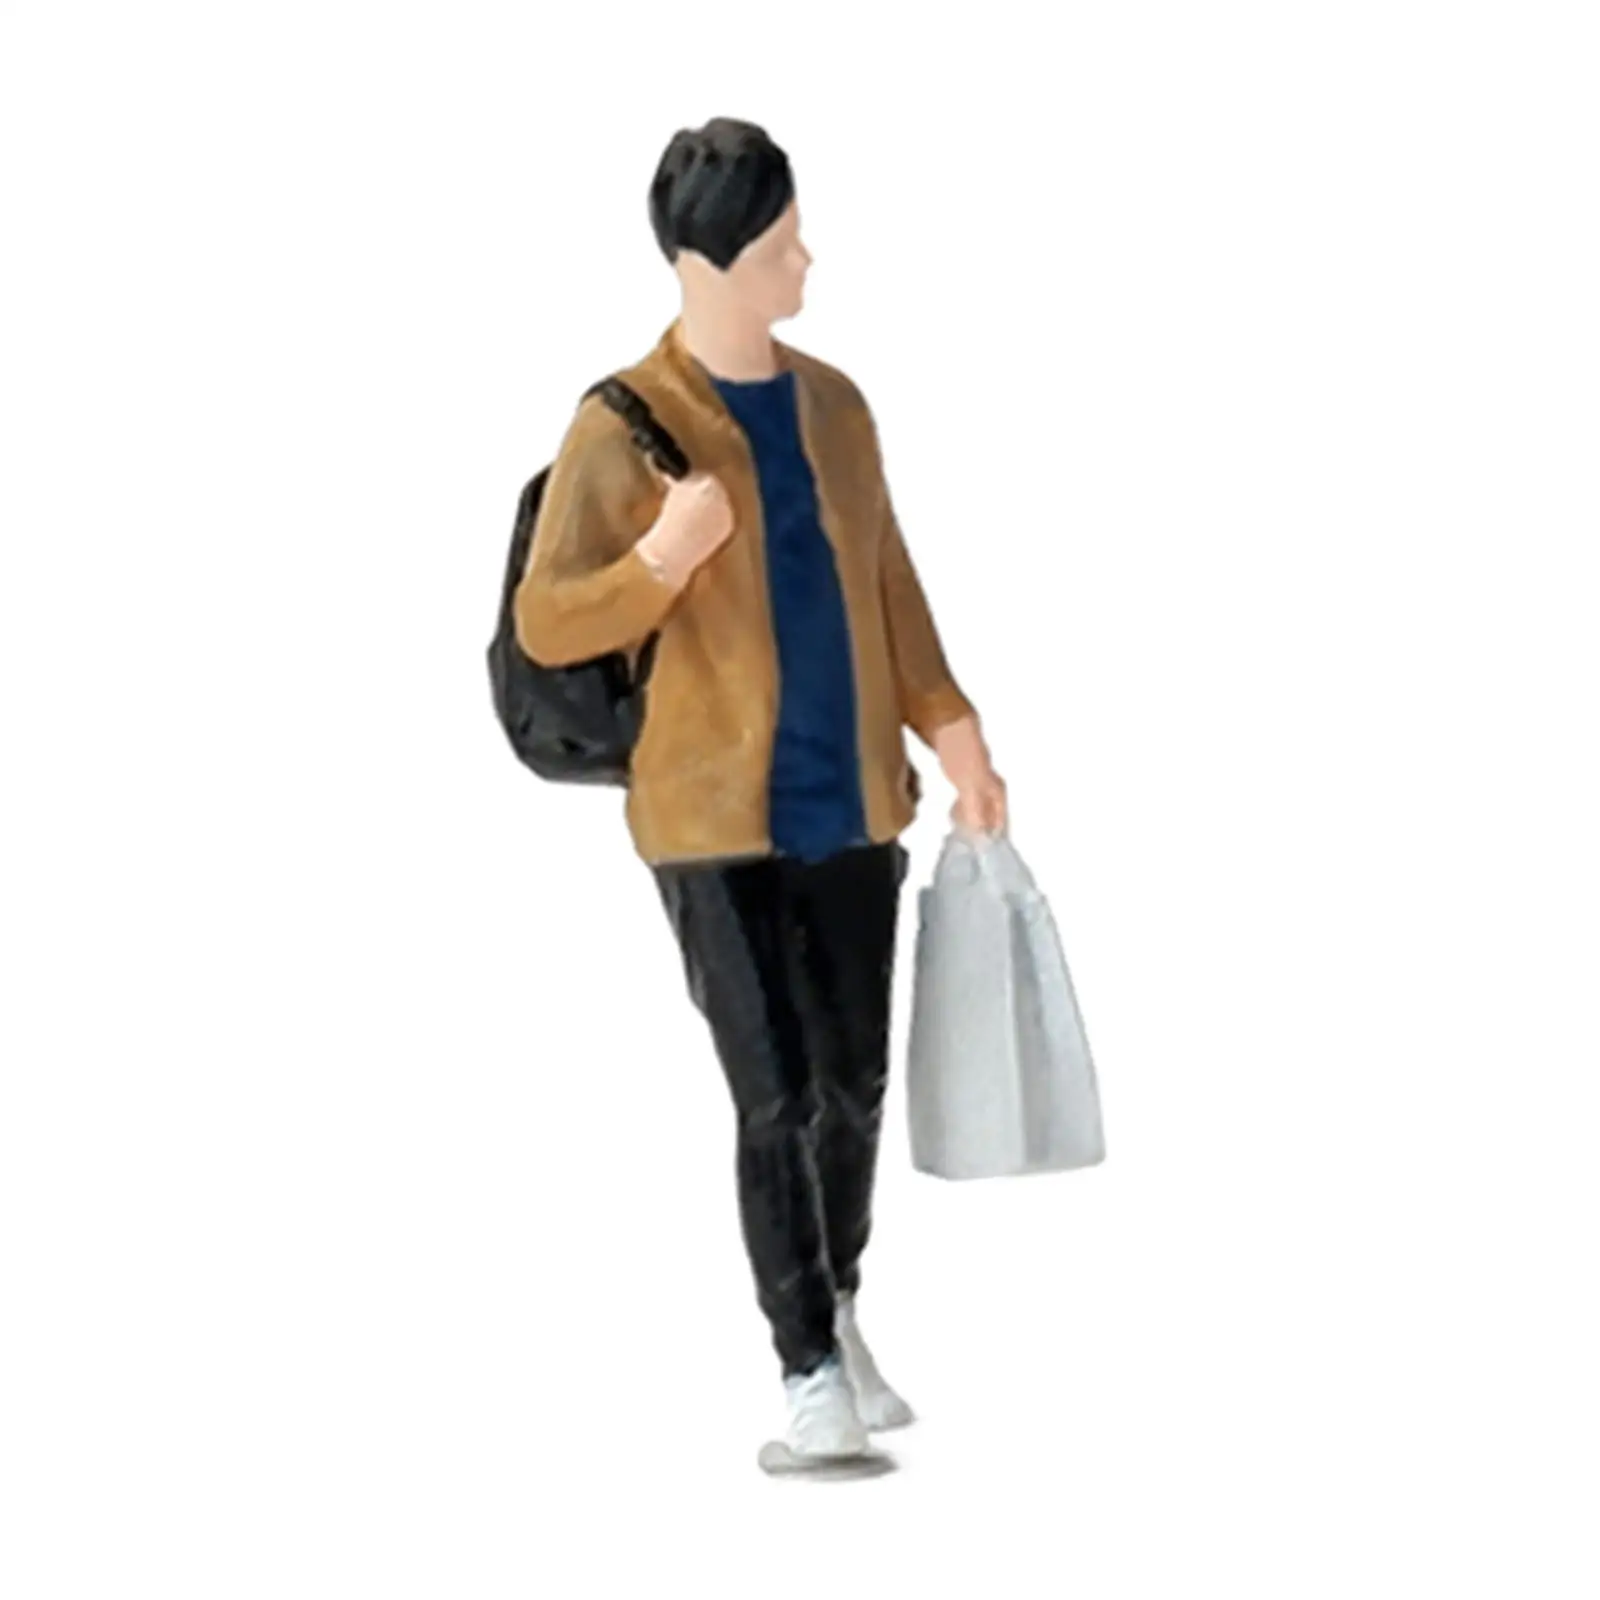 Boys Figurines Figures with Backpack and Lunch Bags for Photography Props Layout